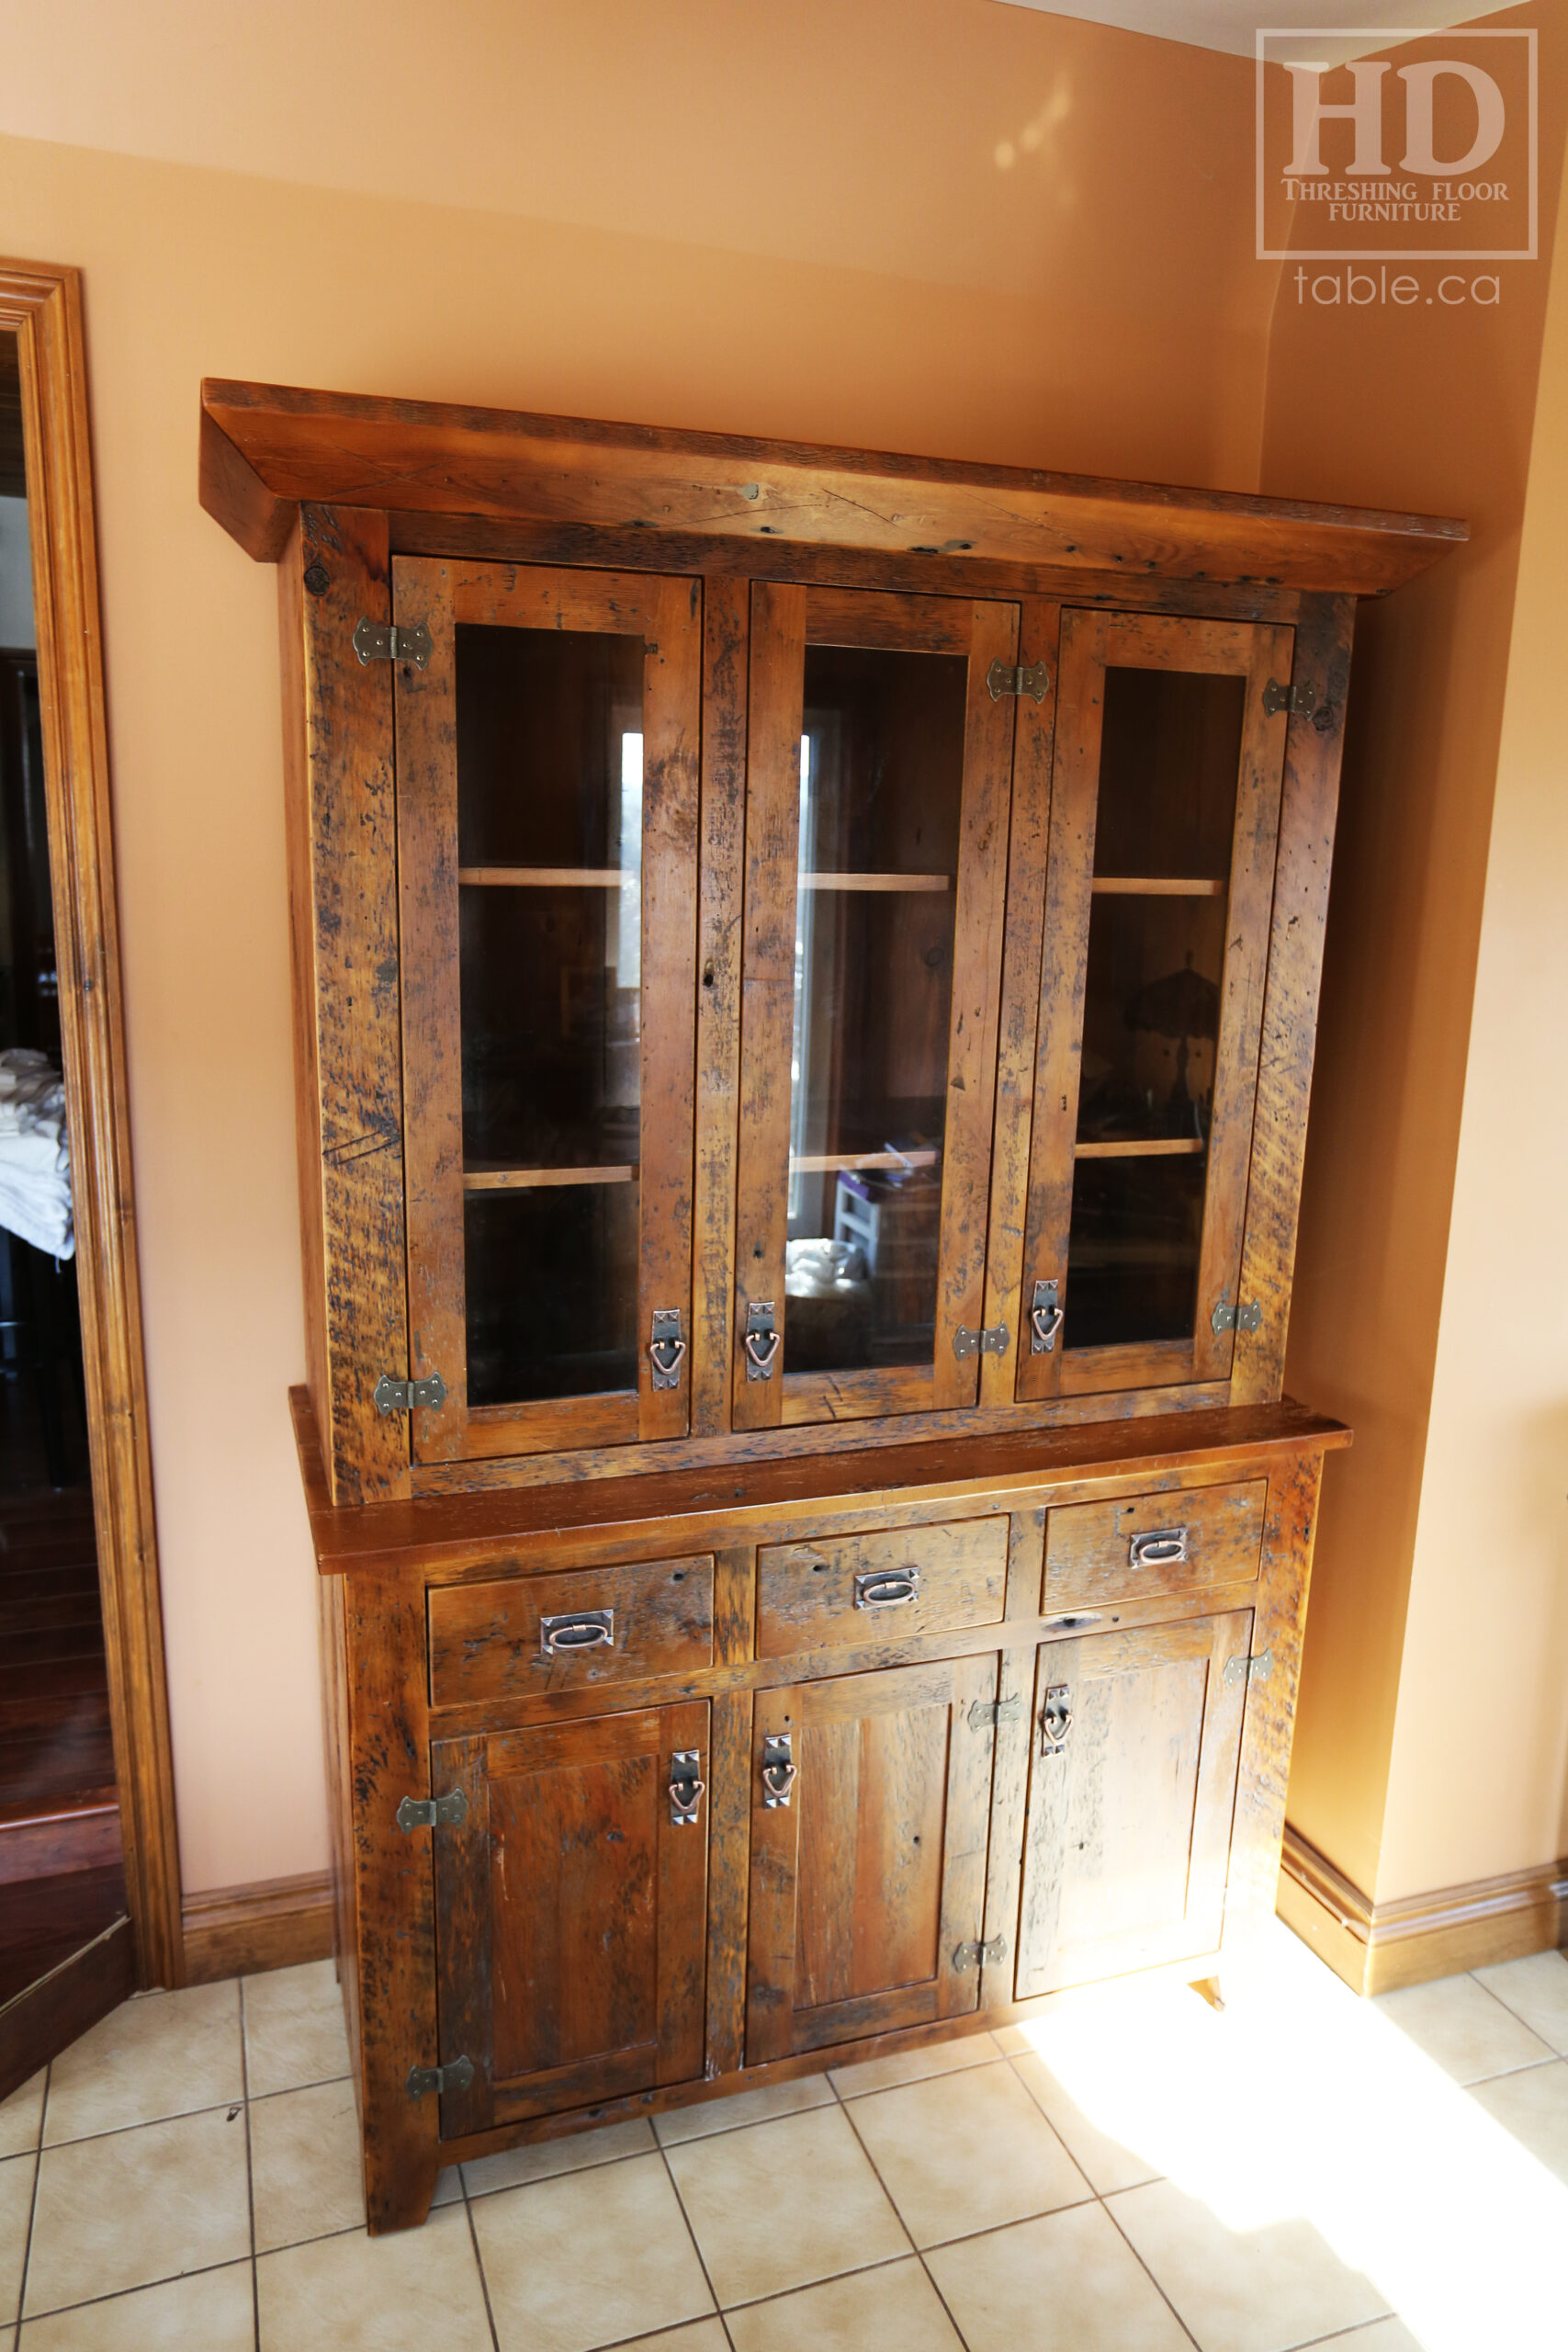 Custom Storage Hutch we made for a Rockwood customer – Reclaimed Hemlock Threshing Floor & Grainery Board Construction – Original edges & distressing maintained – 6 doors – 3 drawers – Polyurethane clearcoat finish – www.table.ca